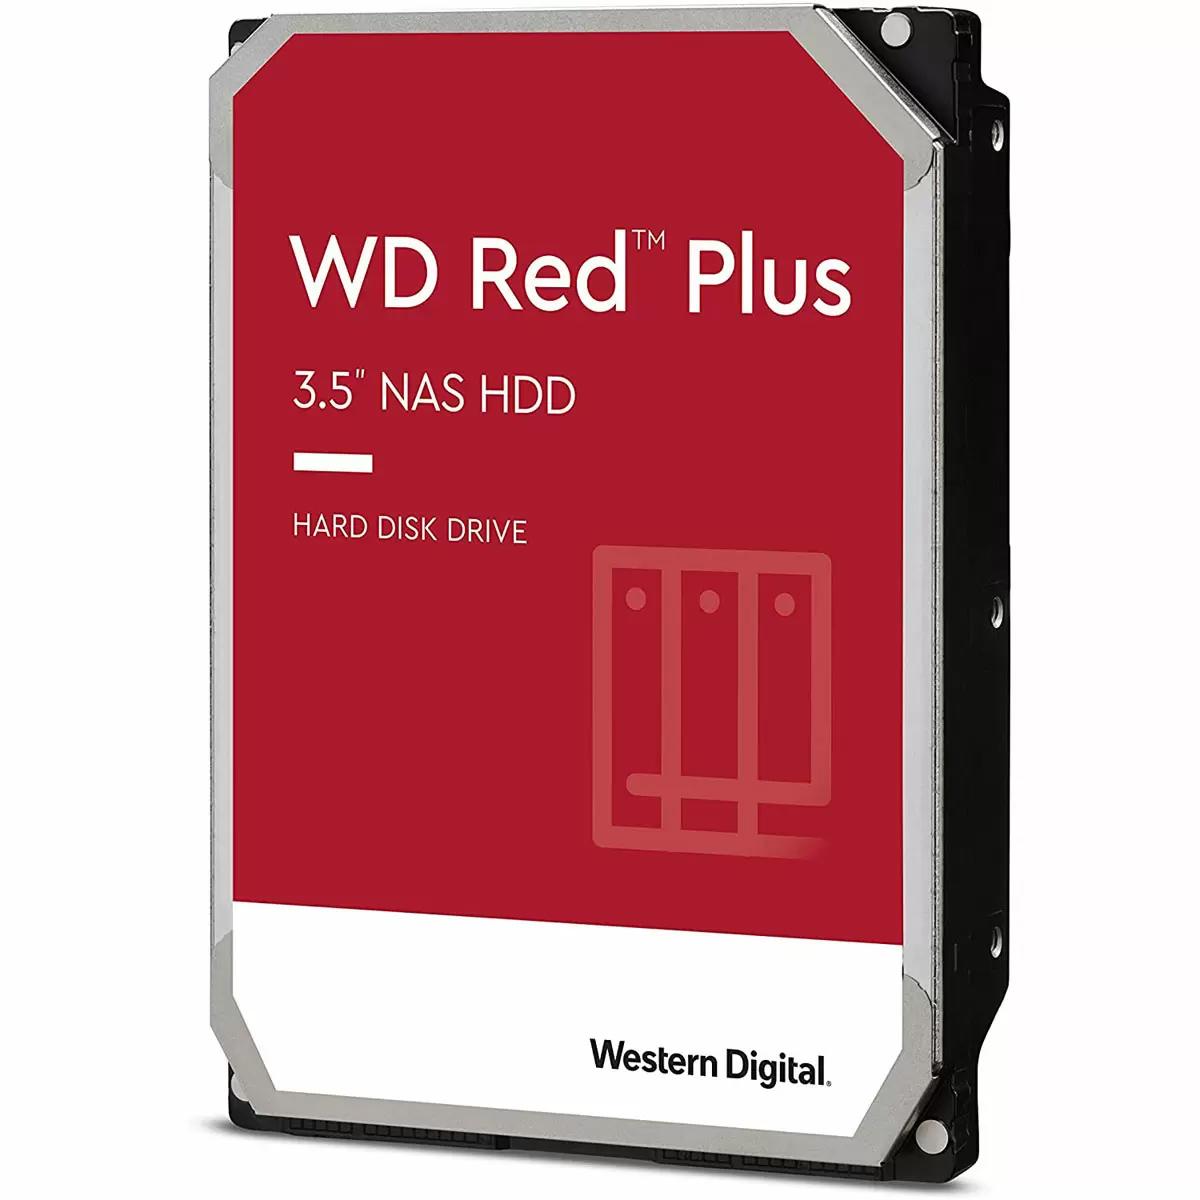 4TB WD Red Plus SATA NAS Internal Hard Drive for $88.99 Shipped